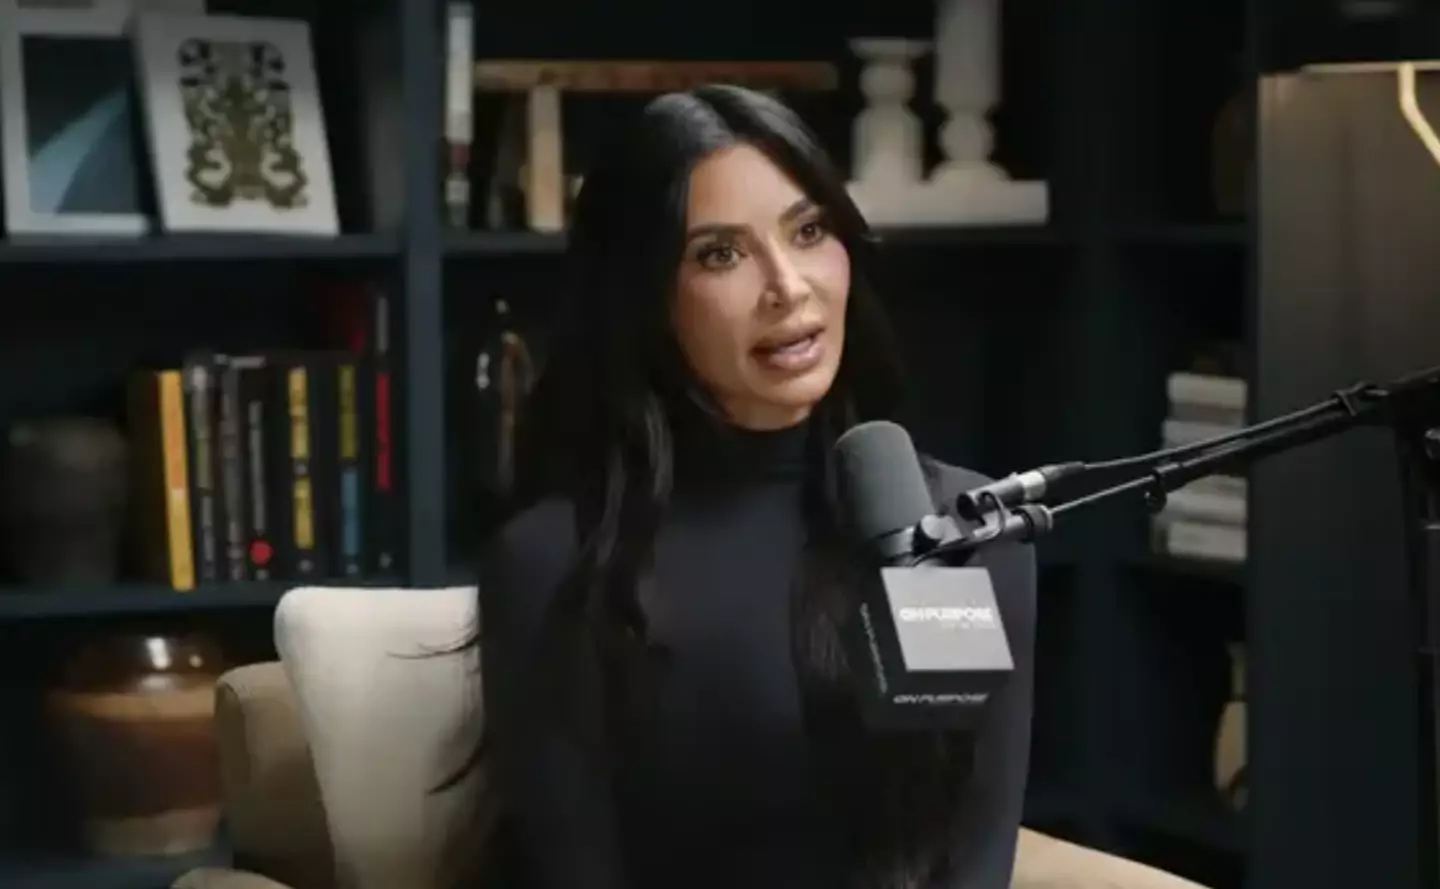 Kim has said she wants to avoid ‘making the same mistakes’ when it comes to relationships.